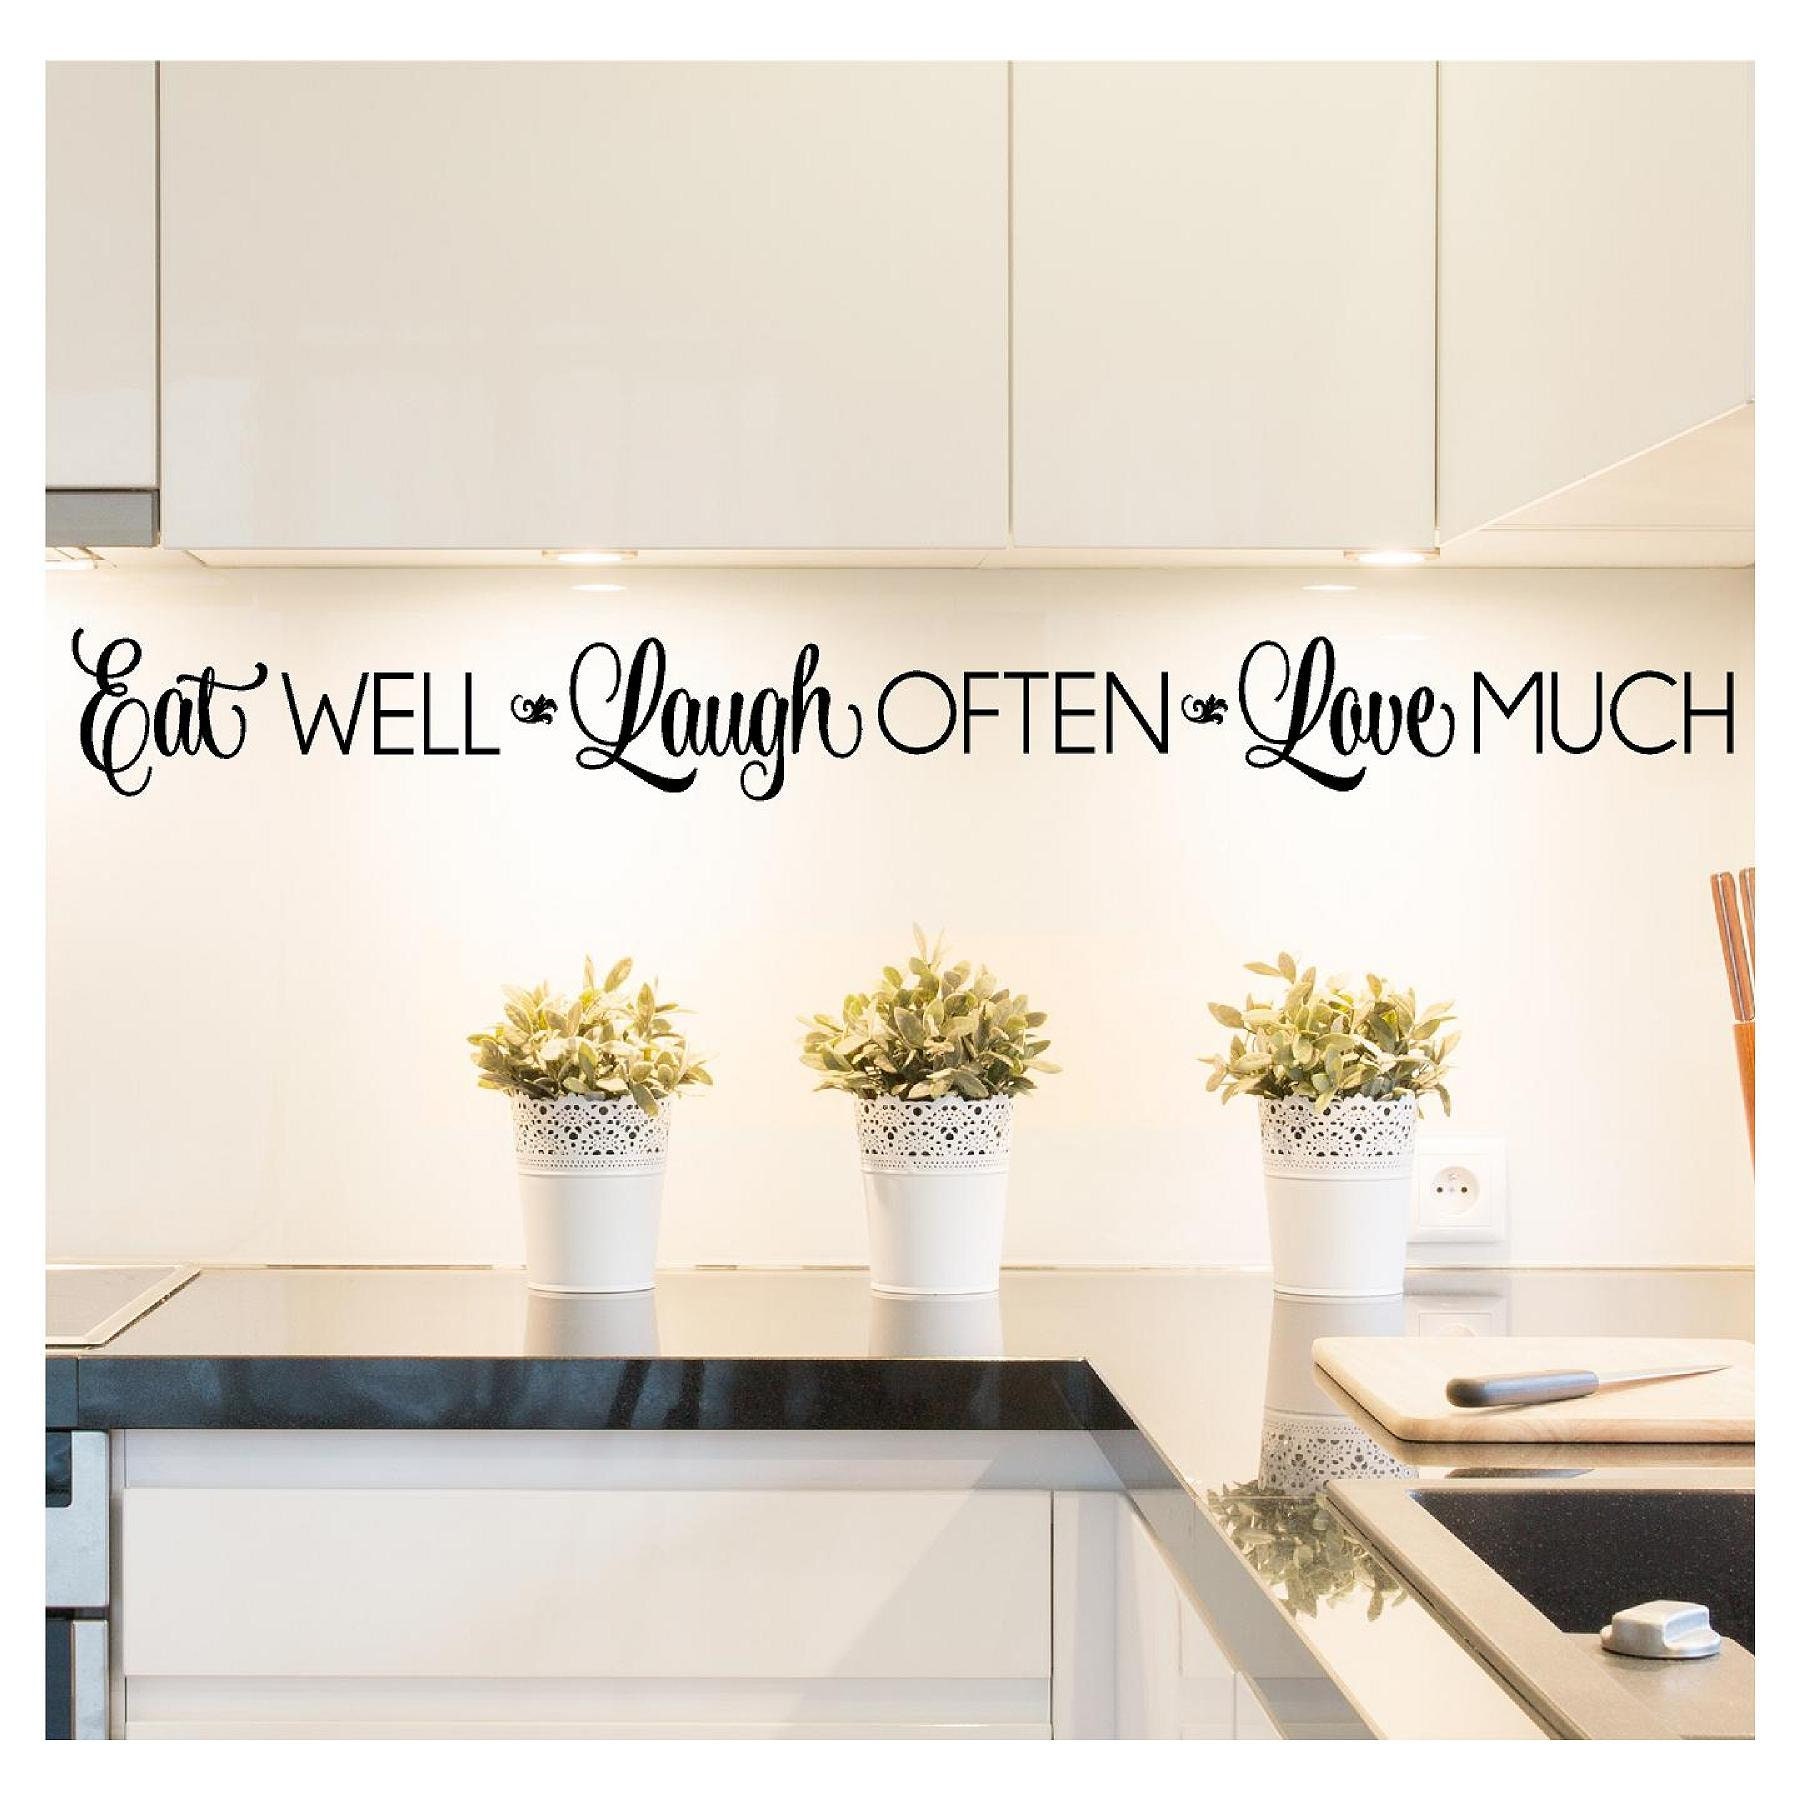 Eat Well, Laugh Often, Love Much Vinyl Lettering Wall Decal Sticker Kitchen Quote Saying Decals Words